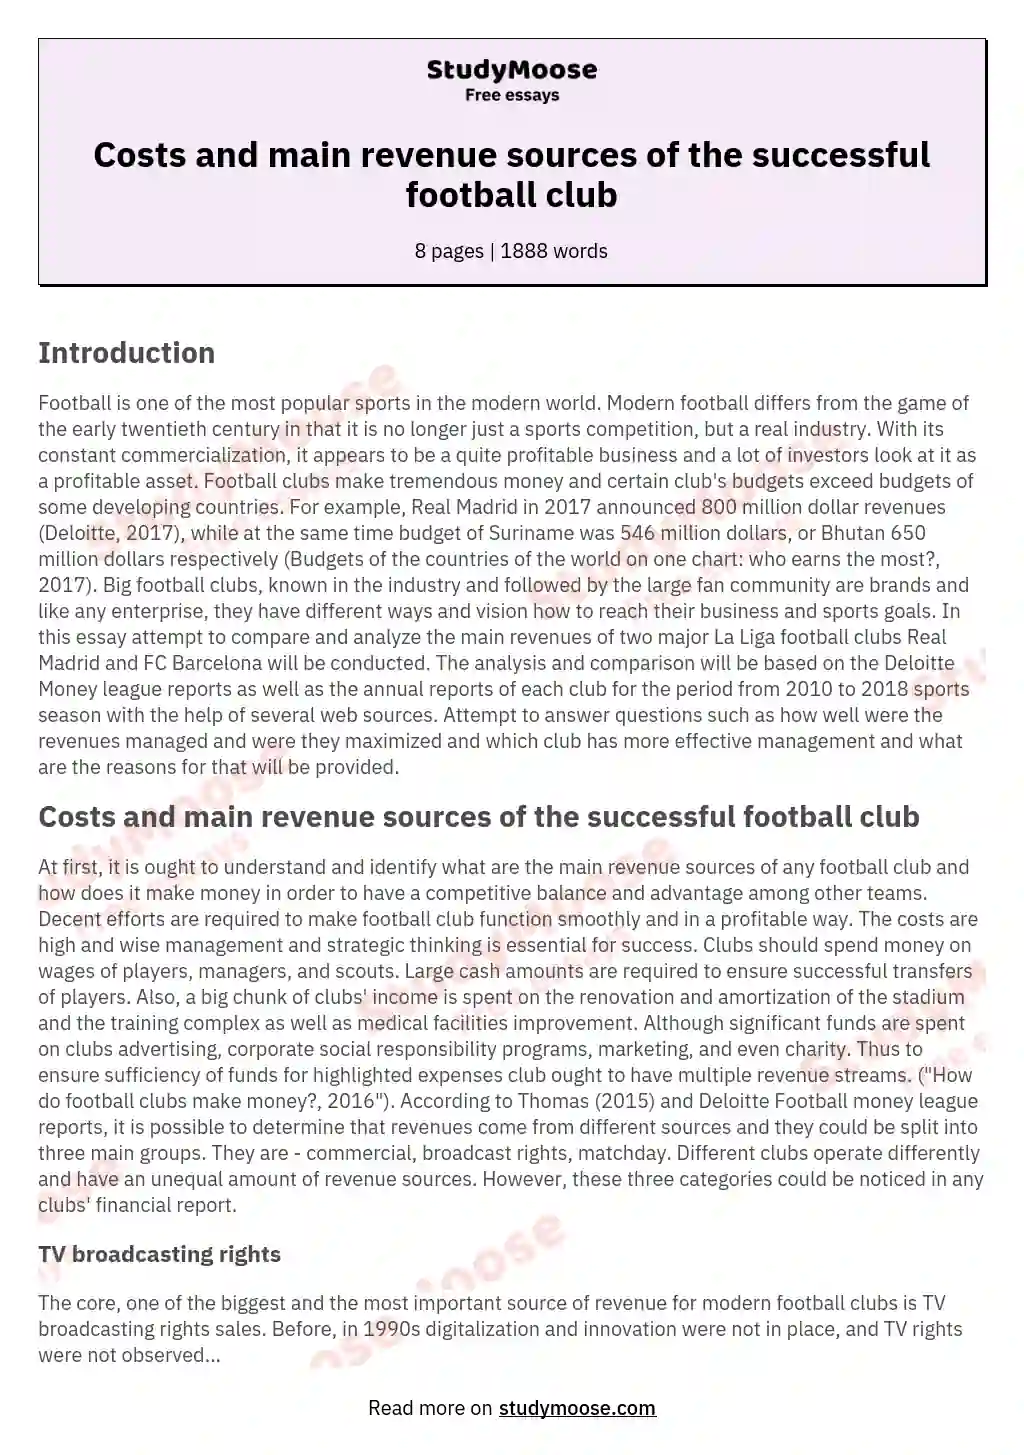 Costs and main revenue sources of the successful football club essay